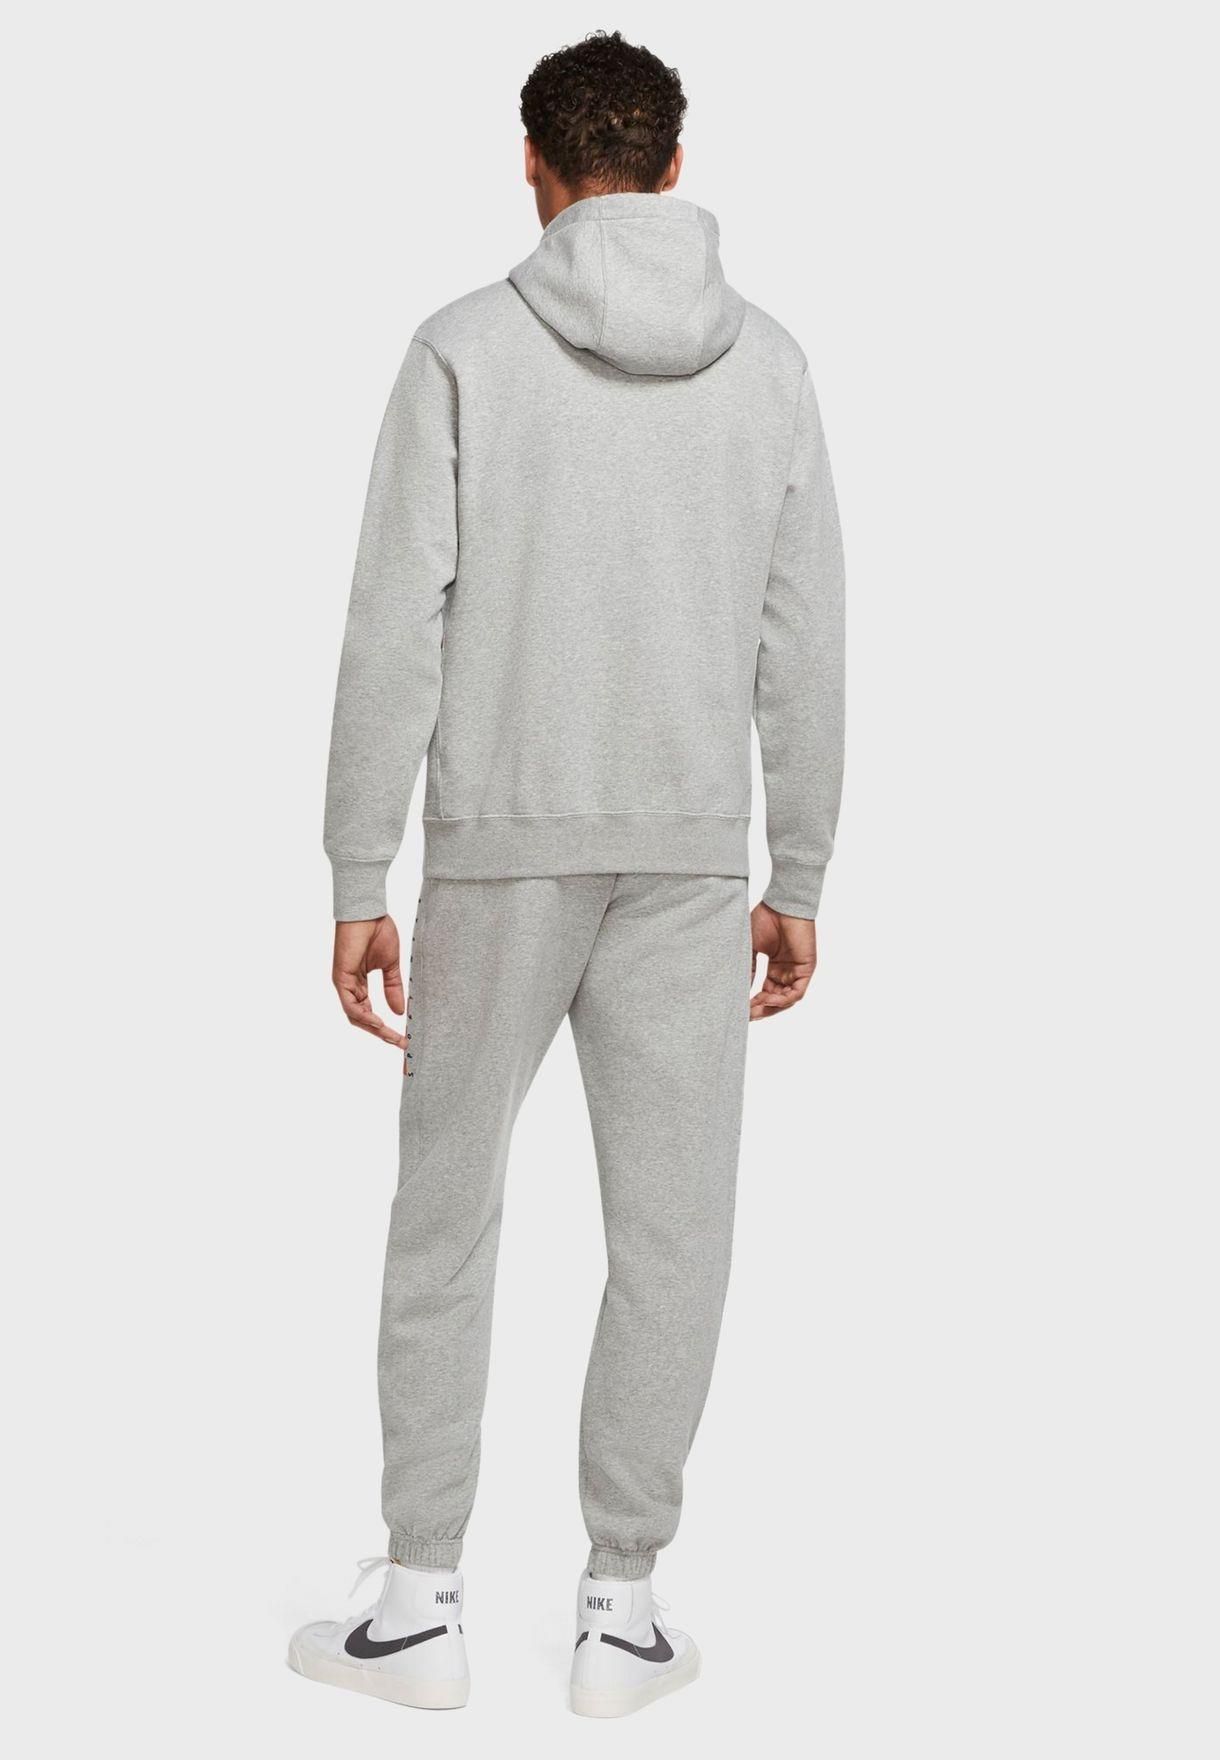 Nike Mens Fleece Hooded Pullover Tracksuit.        
Soft Poly-cotton Blend Light Fleece Fabric.        
Single Pouch Kangaroo Pocket with Dual Side Openings.        
Sweatpants with Elasticised Waist and Hidden Drawstrings.        
Self-Cuffed Hem Joggers.        
Dual Side and Single Wallet Pocket.        
Nike Signature Sportswear Branding Print.